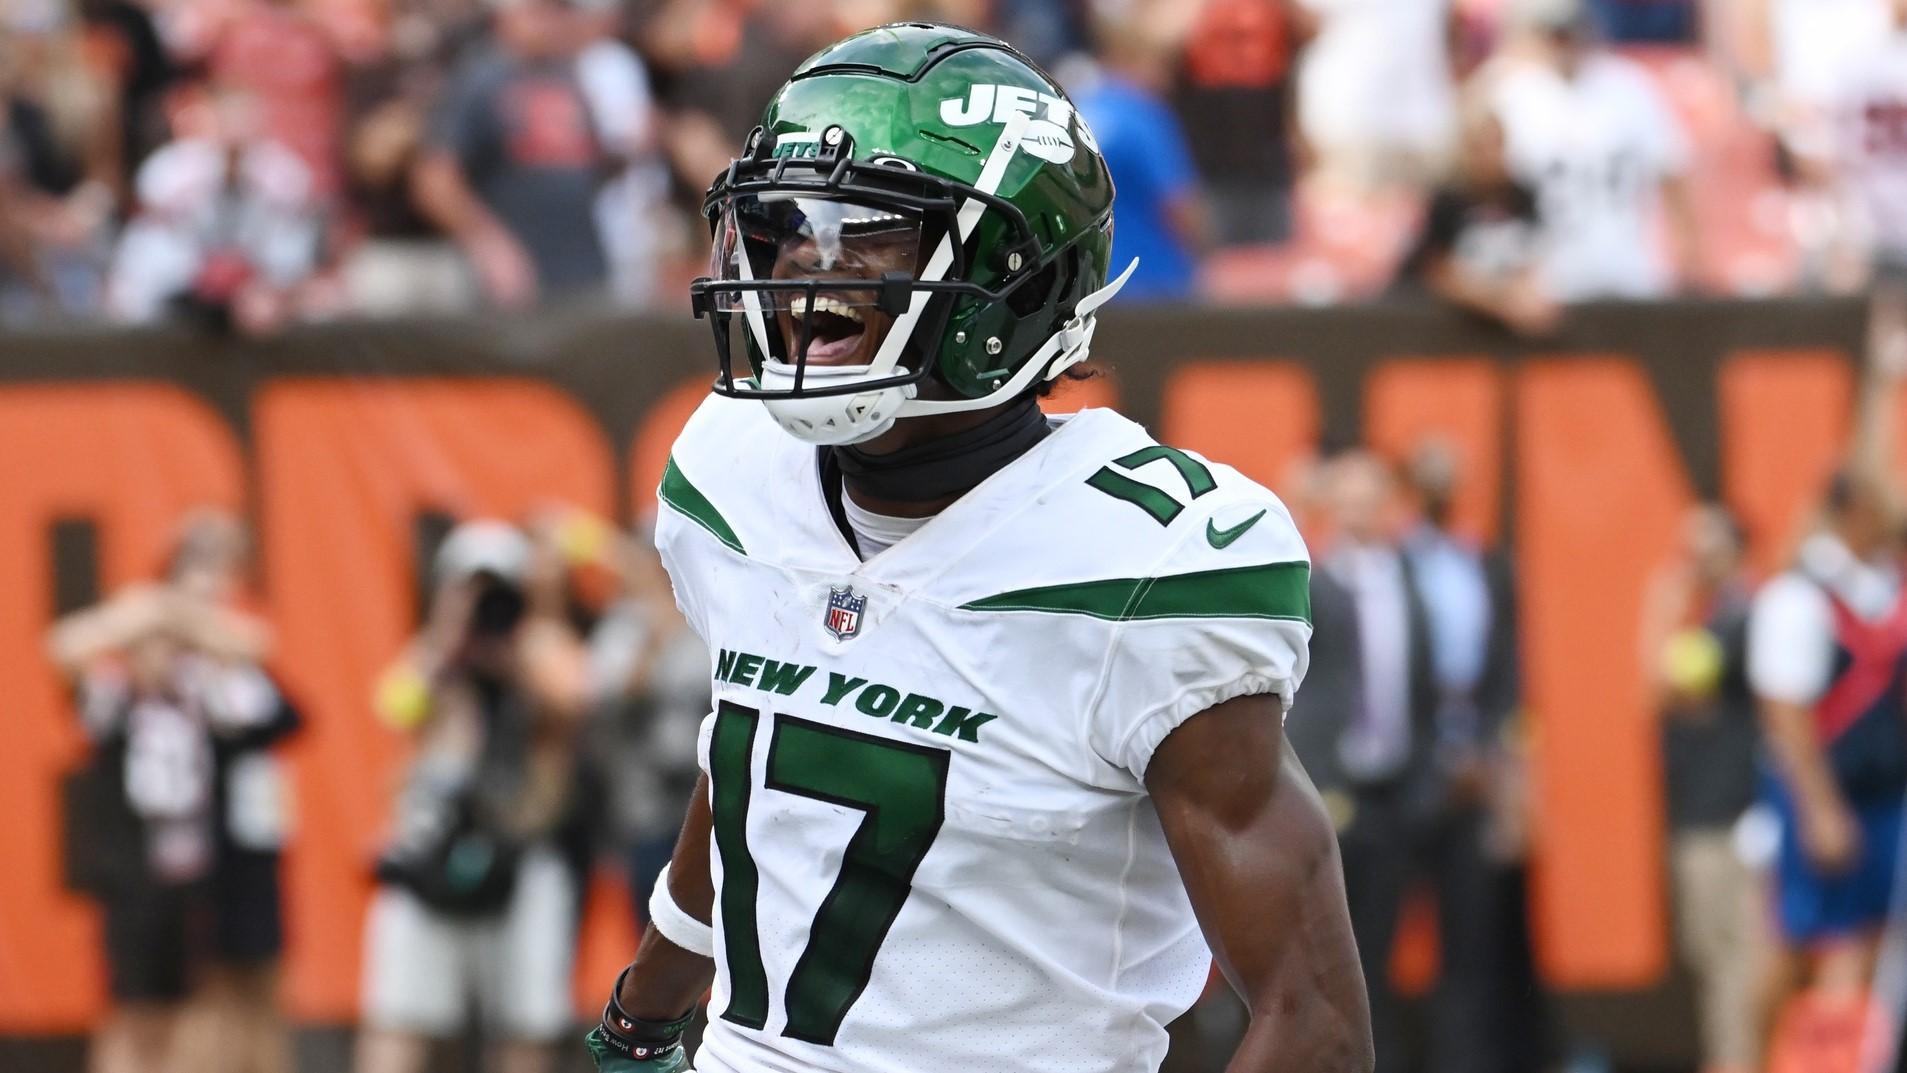 Sep 18, 2022; Cleveland, Ohio, USA; New York Jets wide receiver Garrett Wilson (17) celebrates after catching a touchdown during the fourth quarter against the Cleveland Browns at FirstEnergy Stadium. / Ken Blaze-USA TODAY Sports